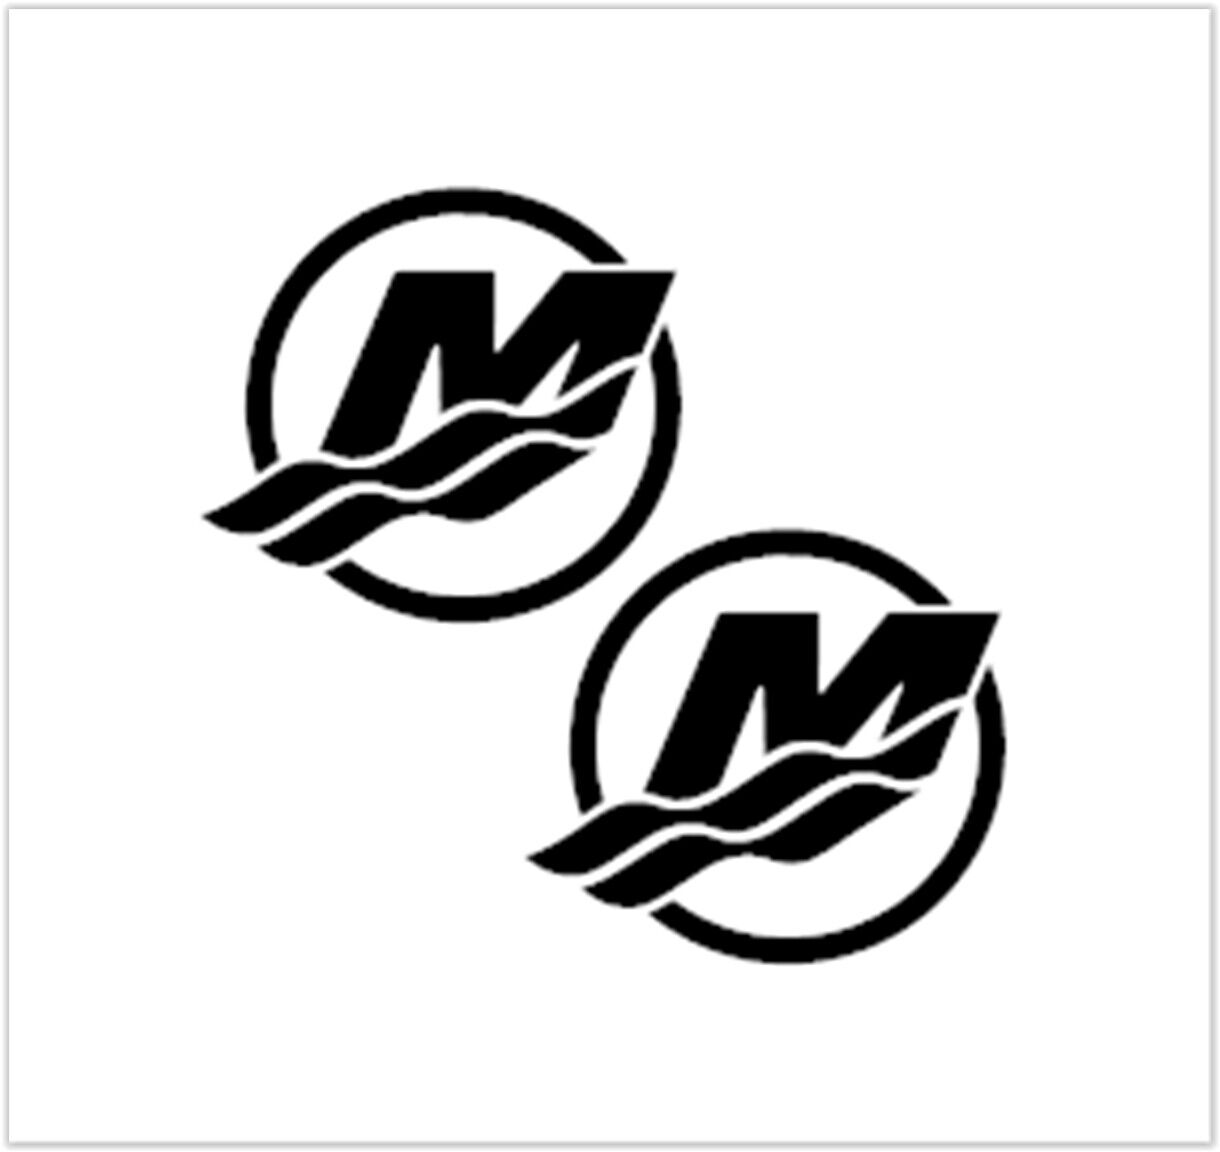 SET OF 2 Vinyl Decals fits Mercury Racing Boat, bumper sticker. Mail w/Tracking